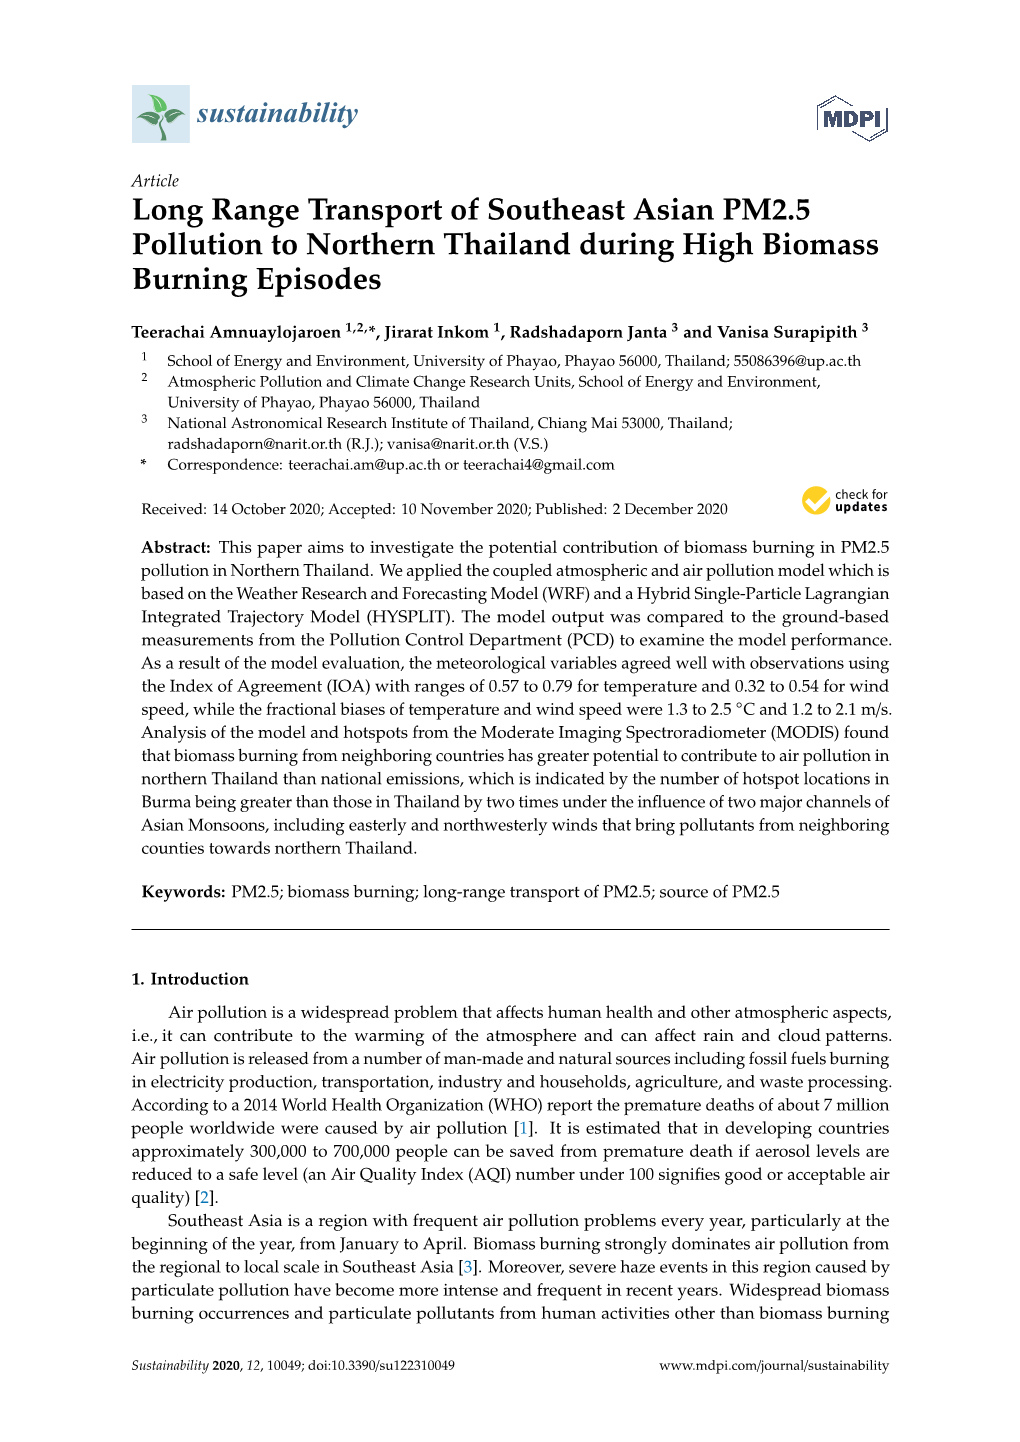 Long Range Transport of Southeast Asian PM2.5 Pollution to Northern Thailand During High Biomass Burning Episodes